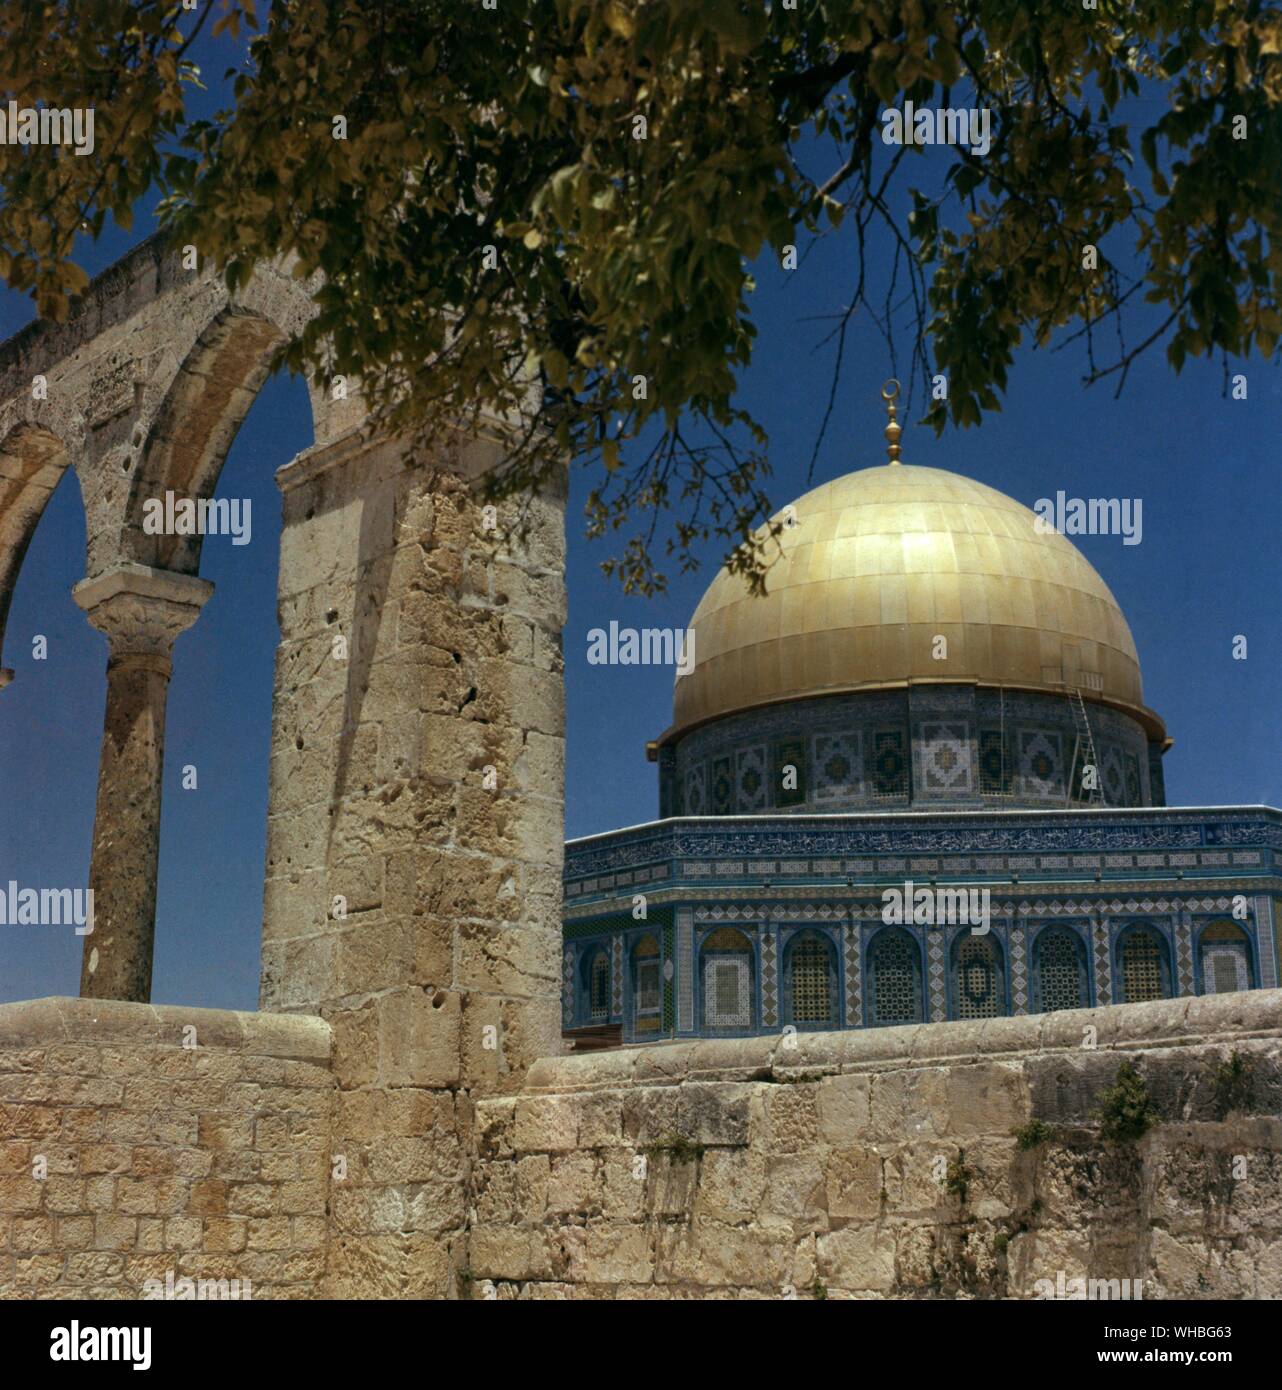 Dome of the Rock, Jerusalem - The Dome of the Rock is an Islamic shrine and a major landmark located on the Temple Mount in Jerusalem. It was completed in 691 making it the oldest extant Islamic building in the world.. Stock Photo